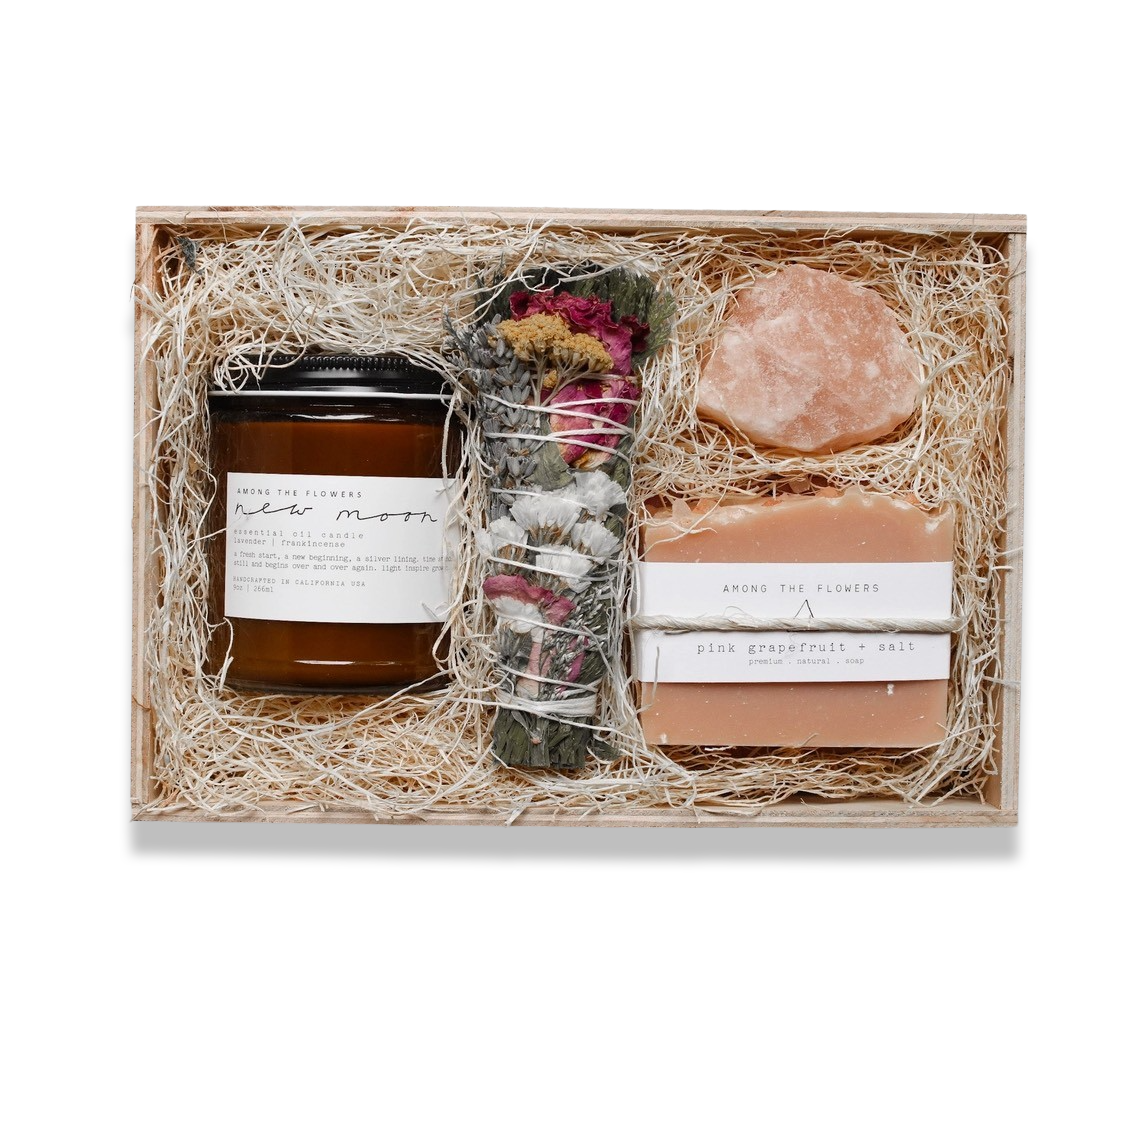 Among the Flowers Sacred Spaces Gift Box